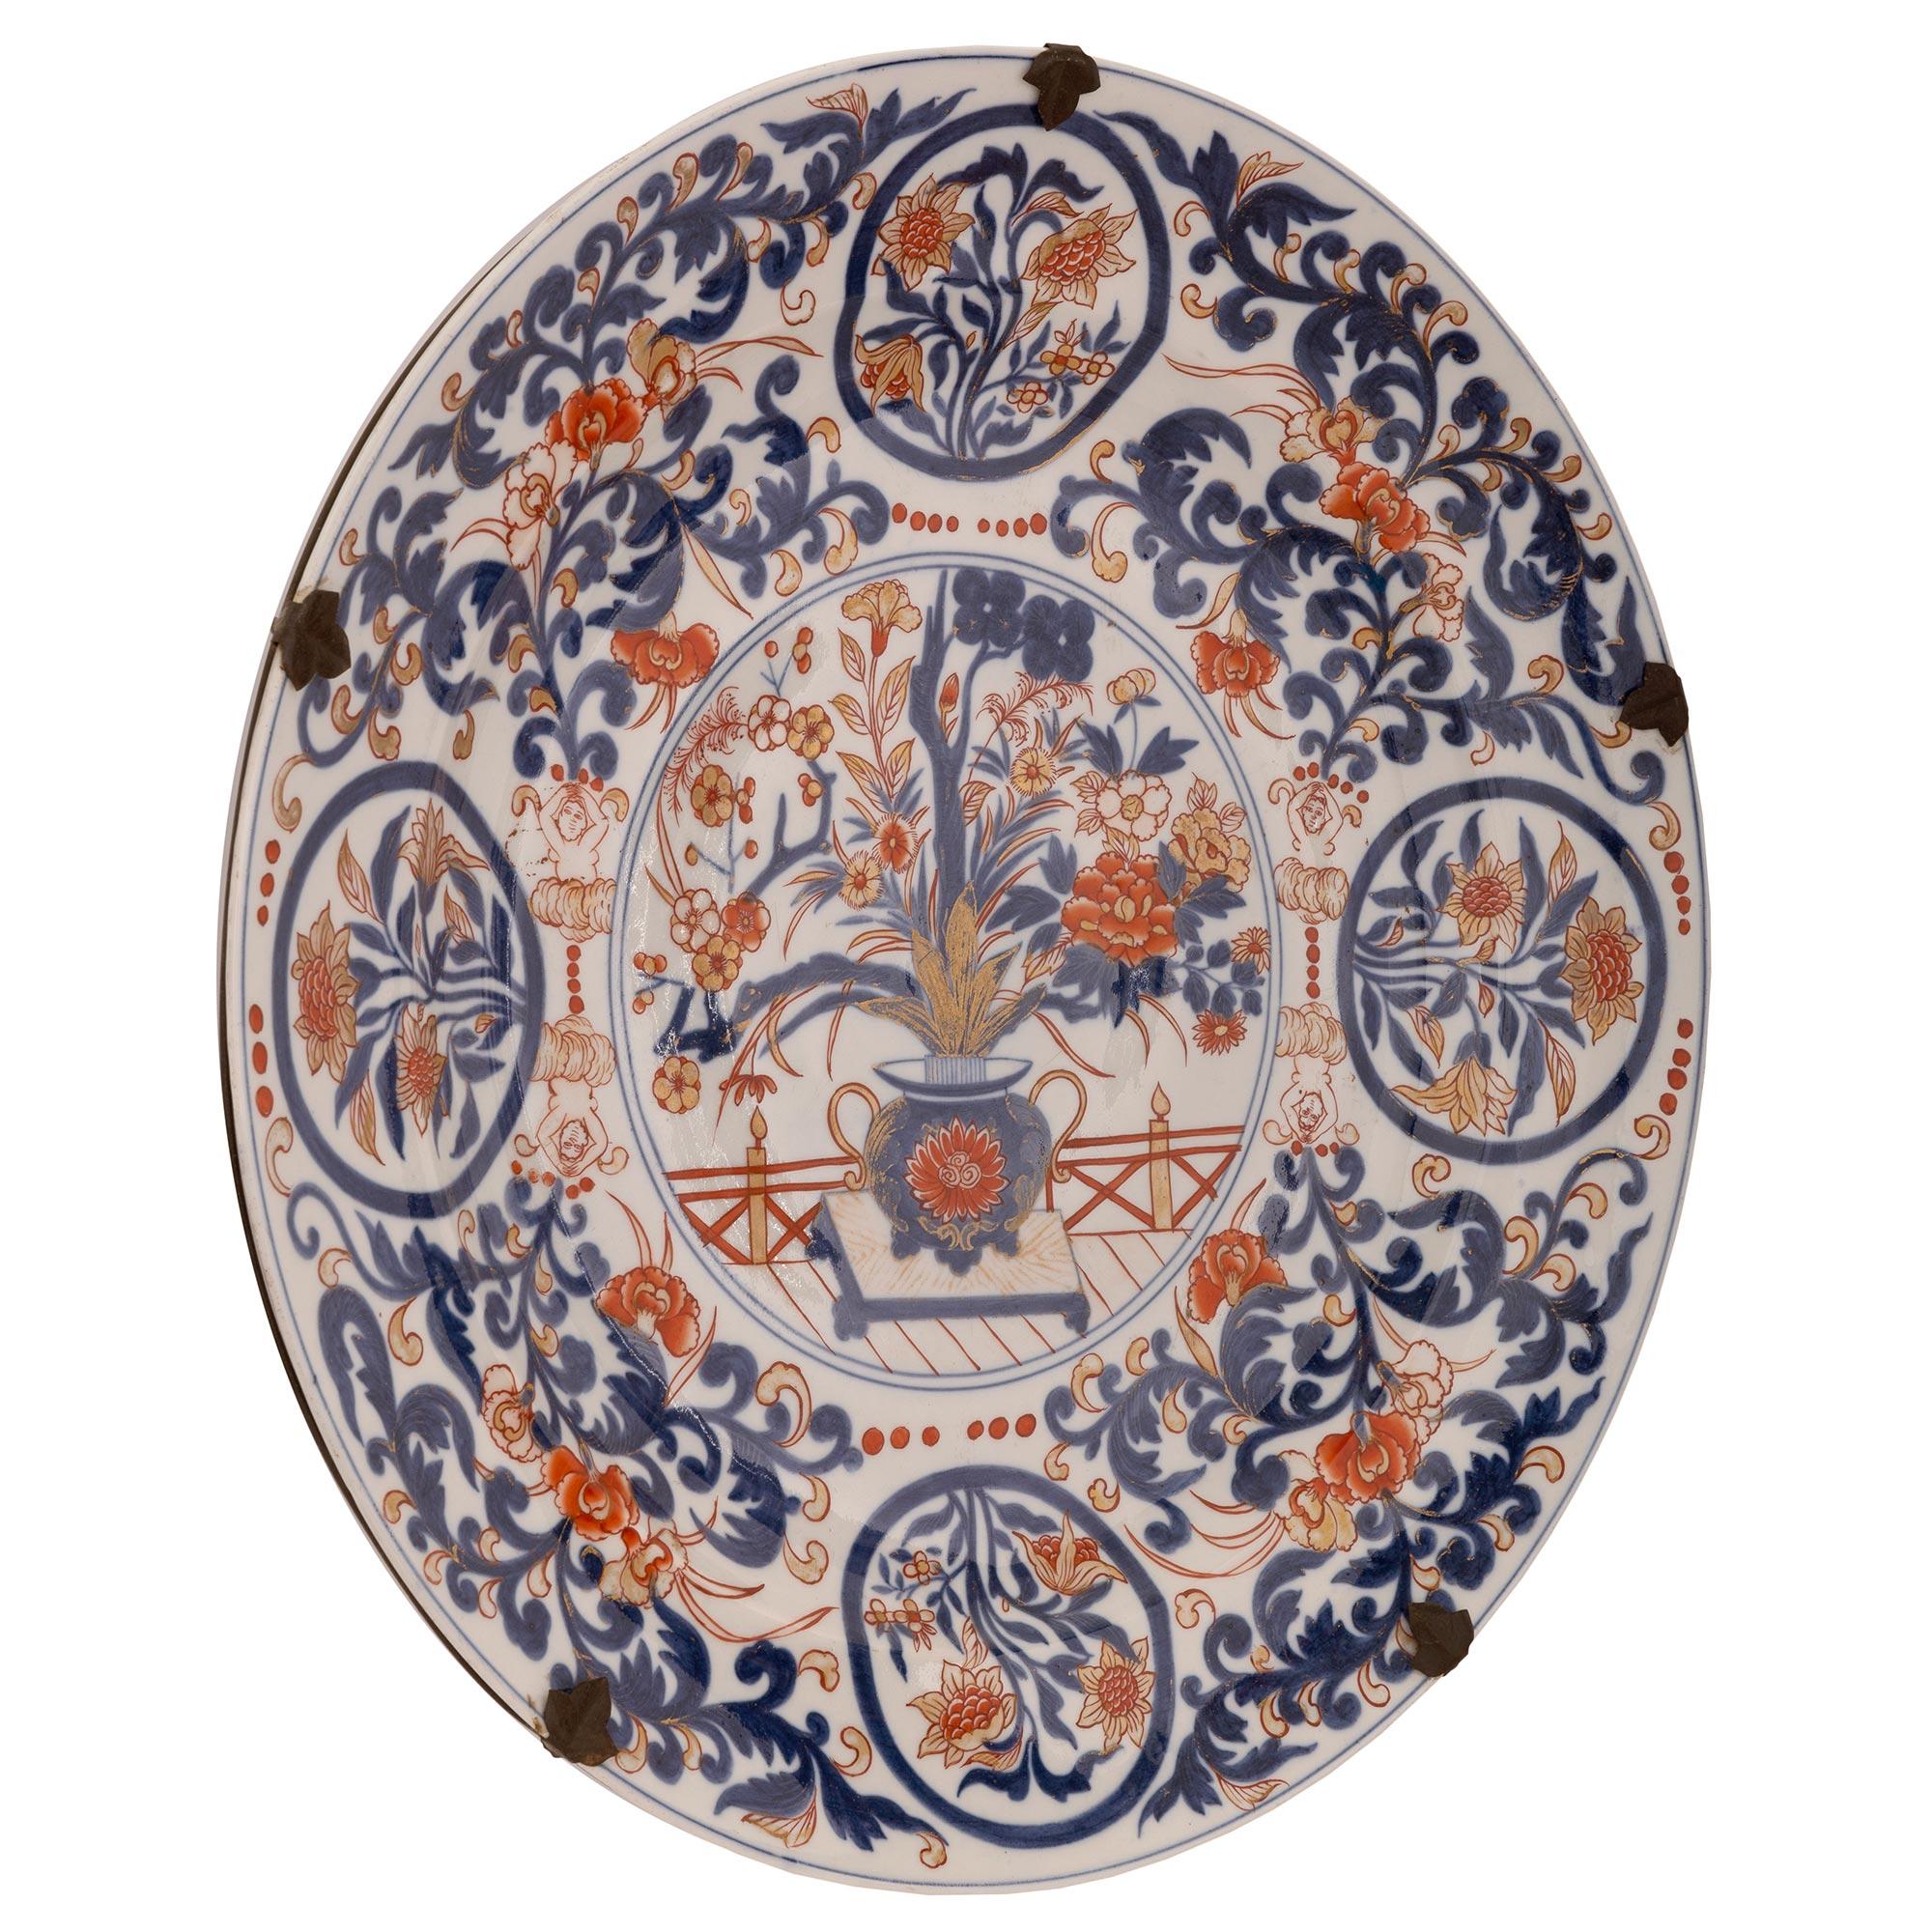 A beautiful and most decorative pair of Japanese 19th century Imari porcelain plates. Each circular plate displays striking finely detailed scrolled foliate designs with flowers in an urn at the center in the traditional red and blue colors with